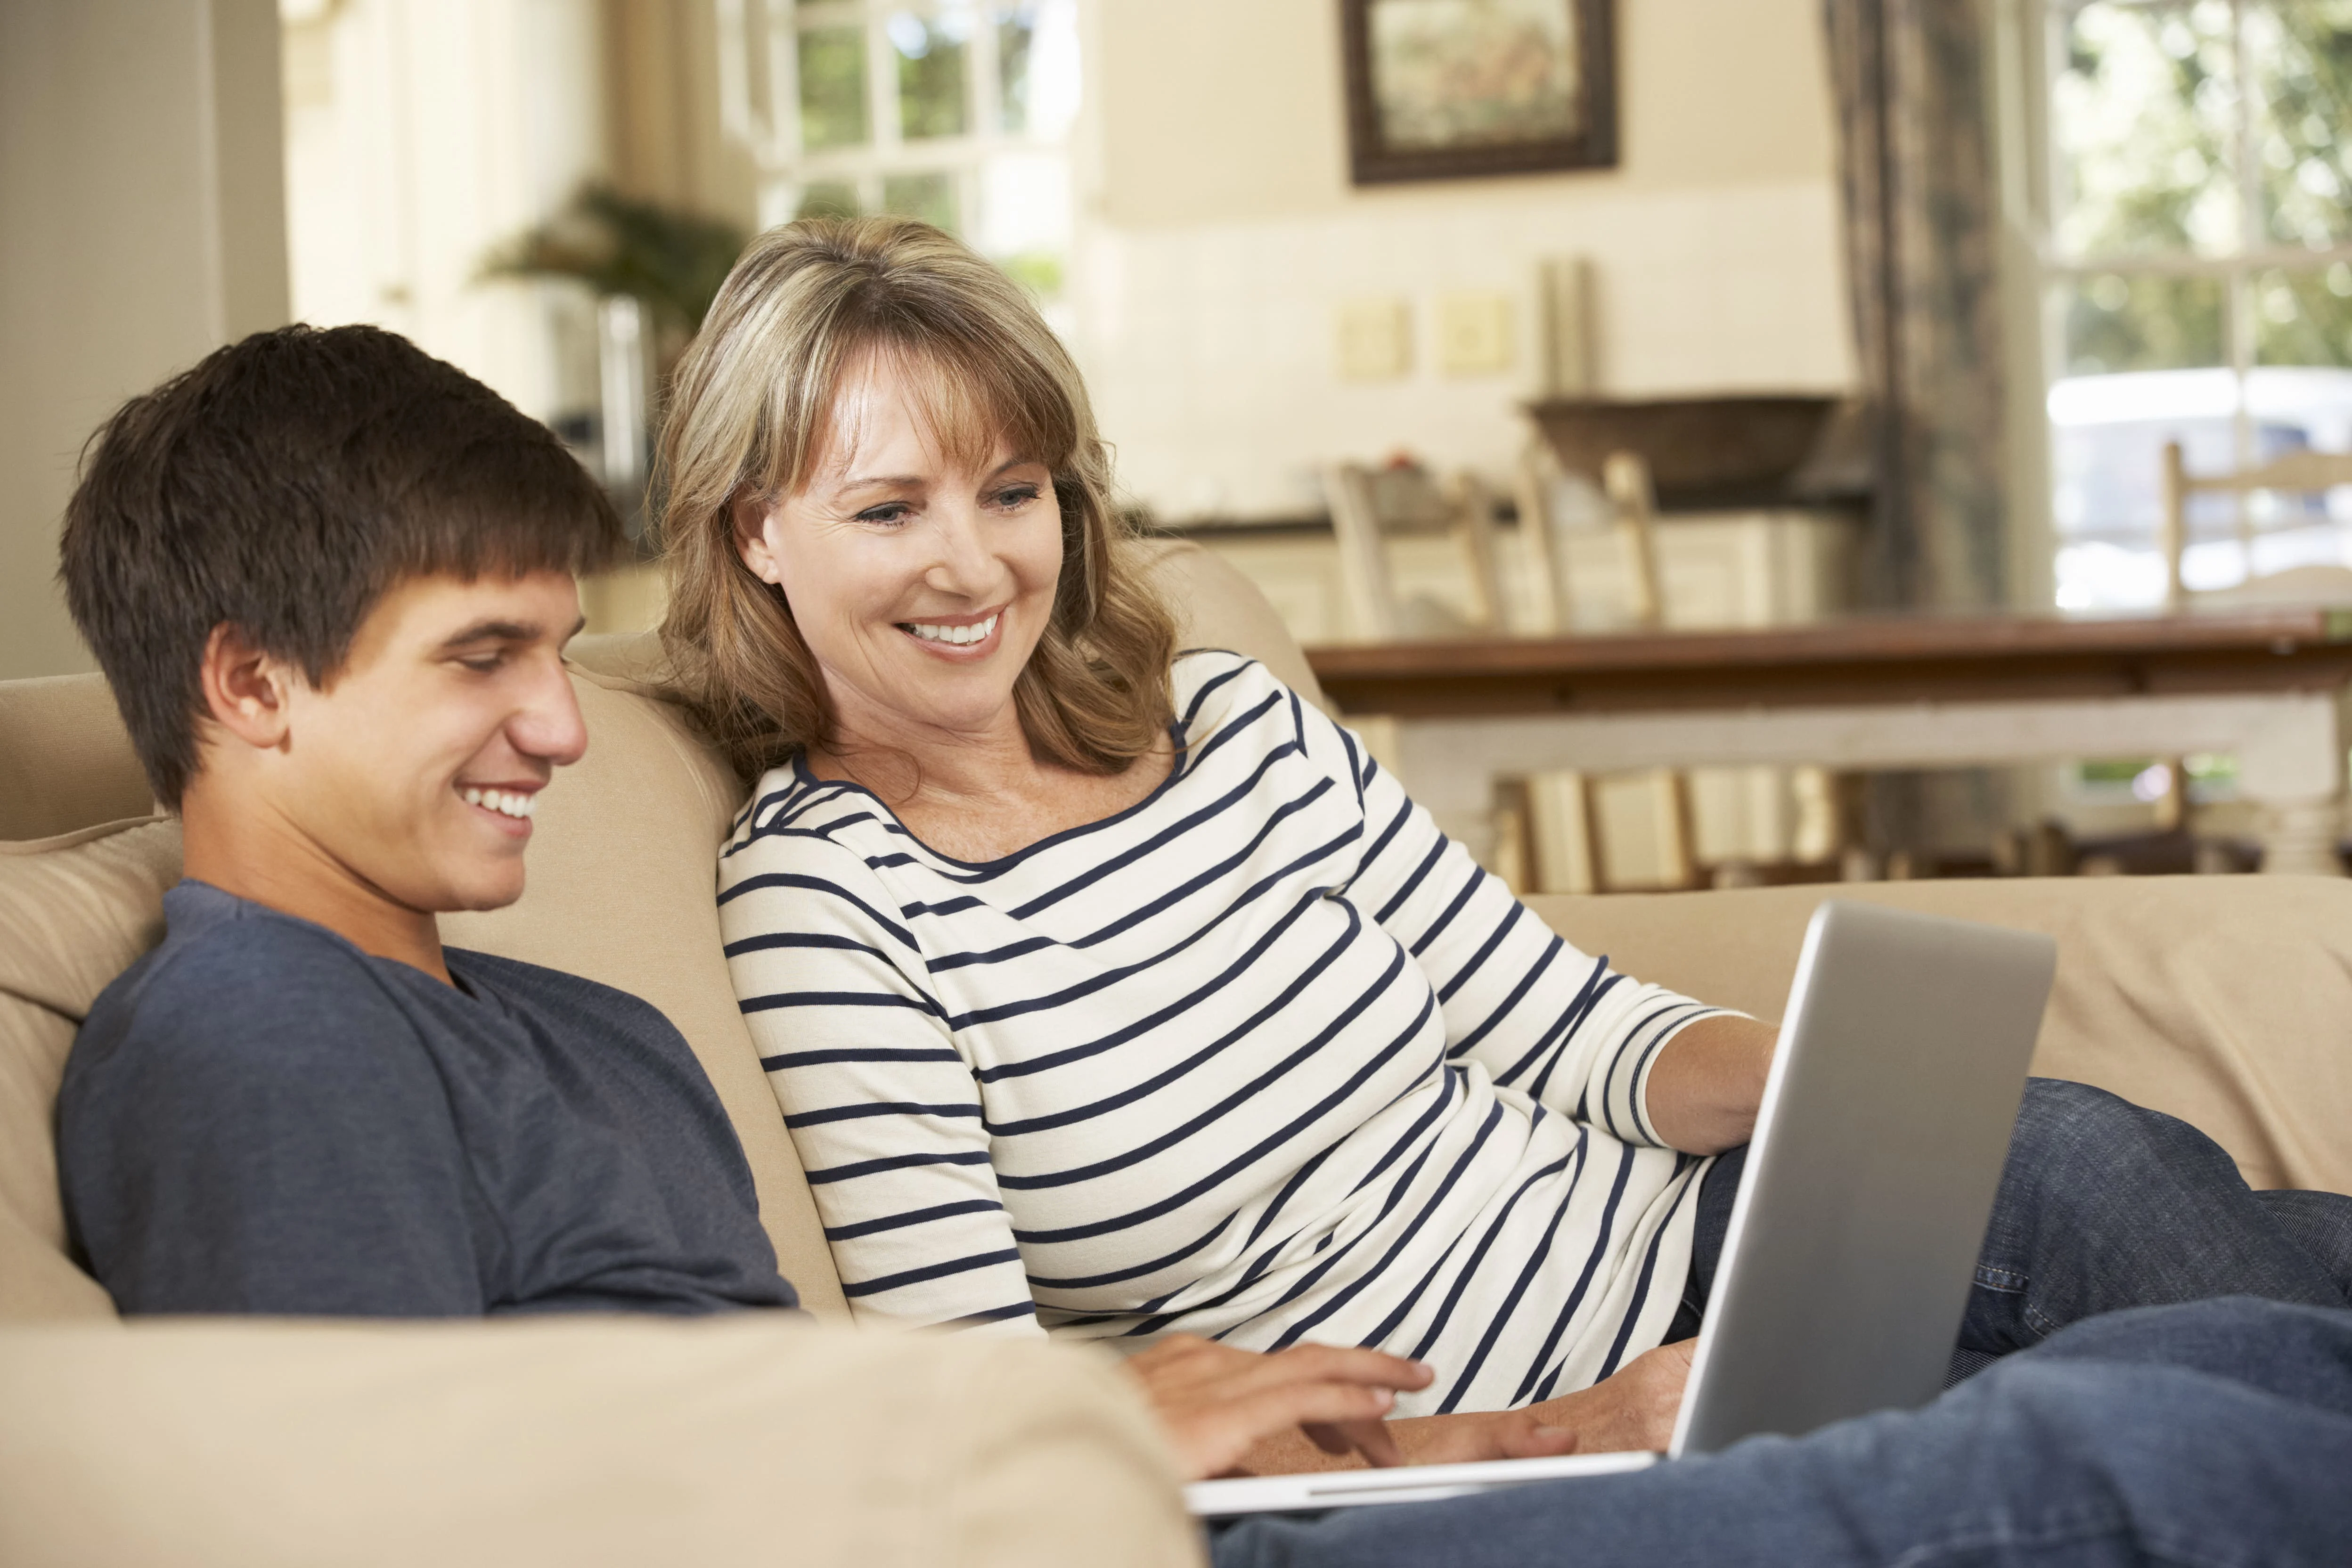 Son and a mother sitting at a couch and looking at a laptop screen